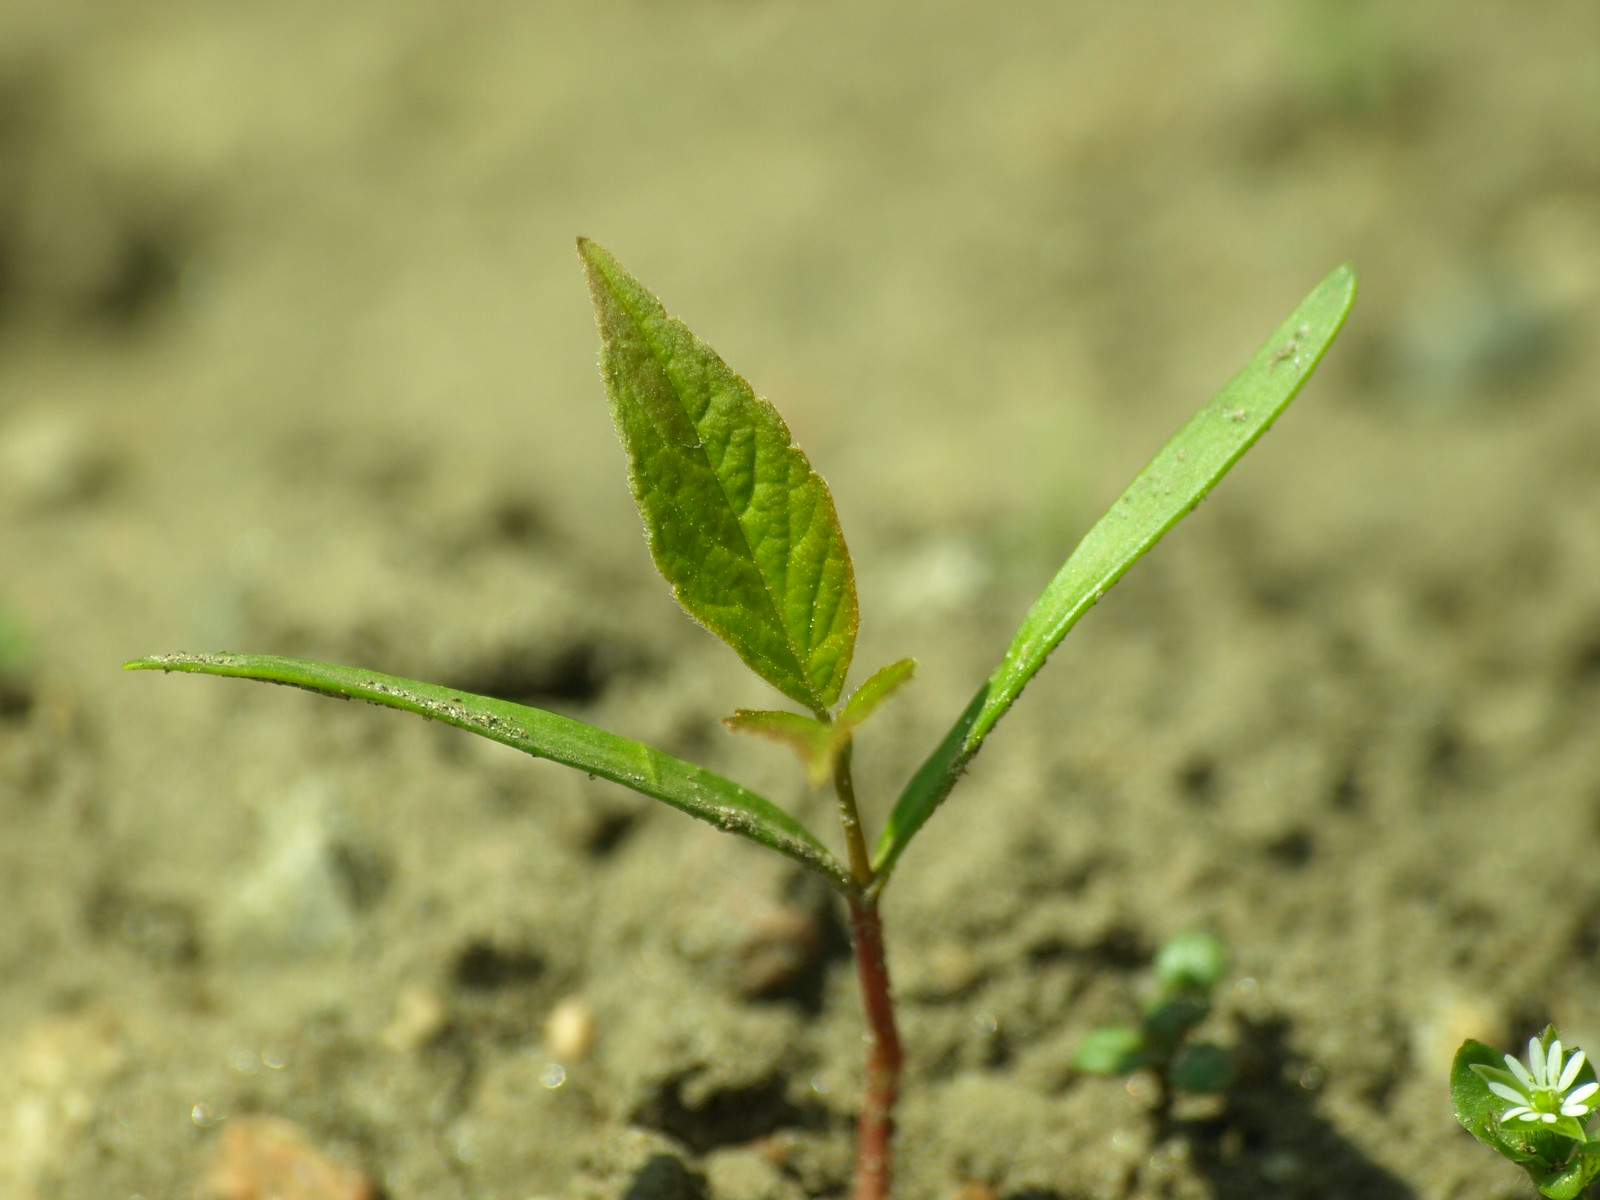 Tree seedling, courtesy of Fire Engine Red, Flickr, under Creative Commons.